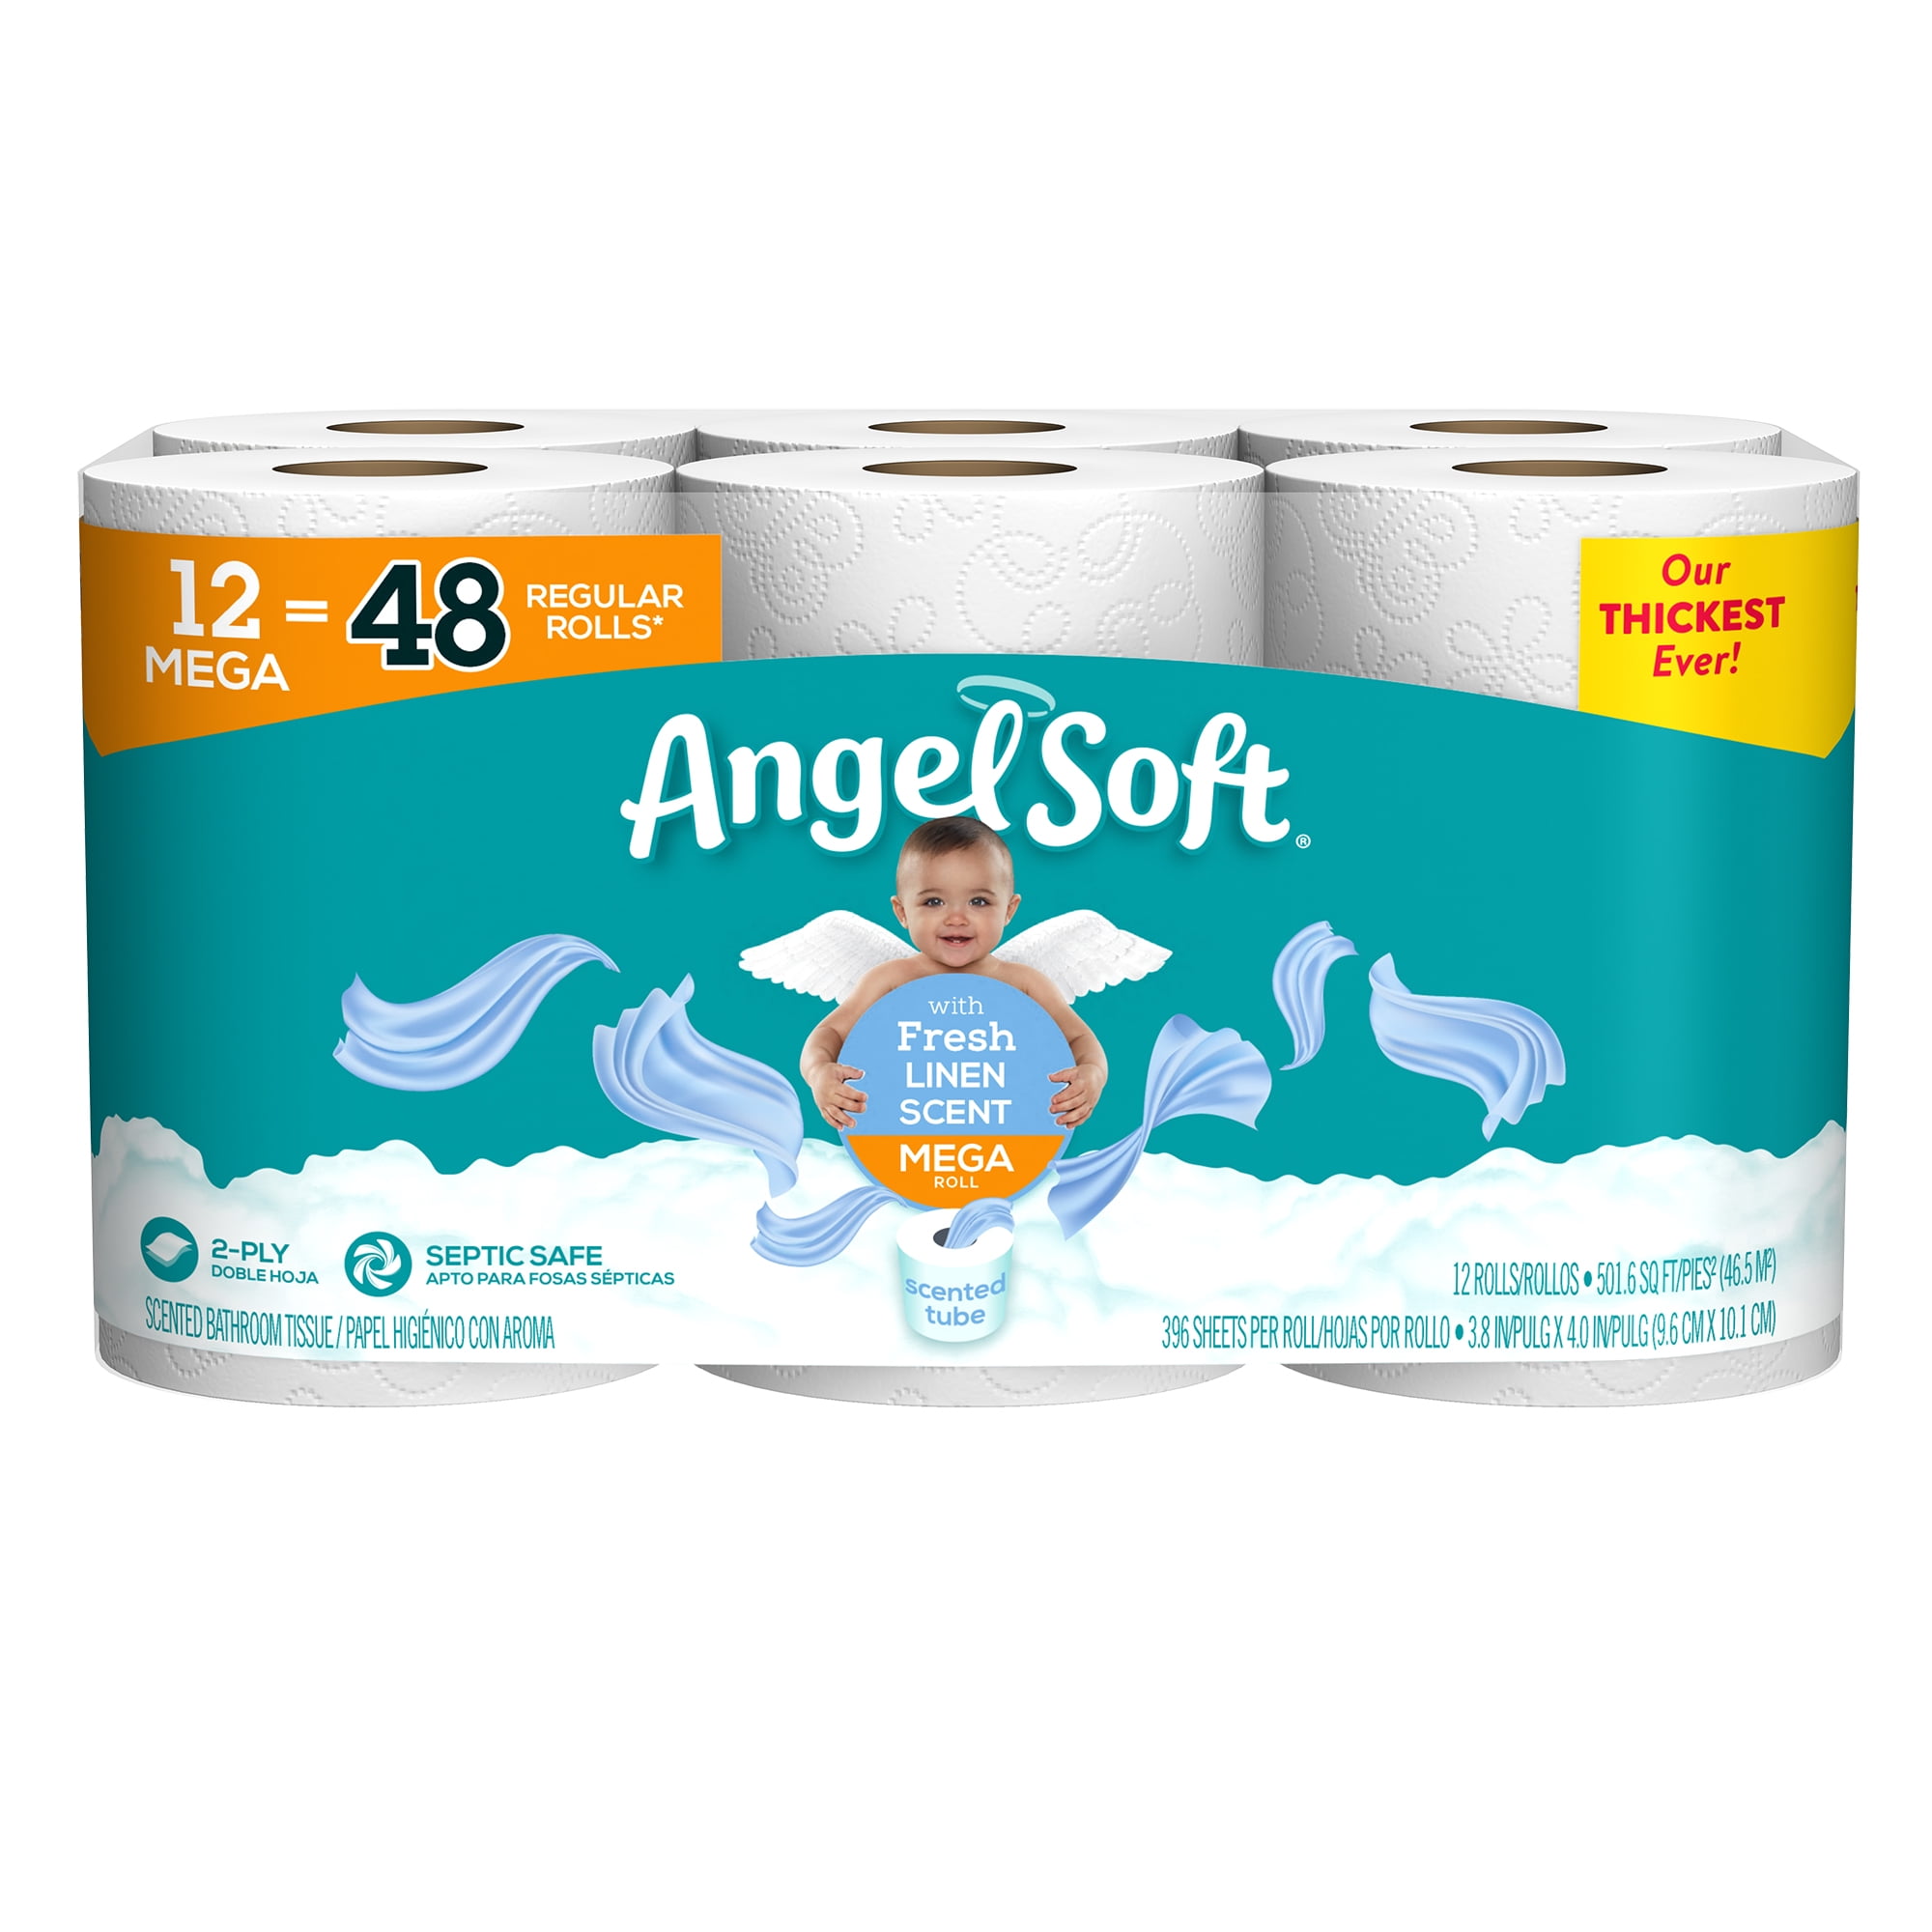 Details about   Soft Toilet Paper with Fresh Linen Scent 48 Double Rolls= 96 Regular 2-Ply Best 